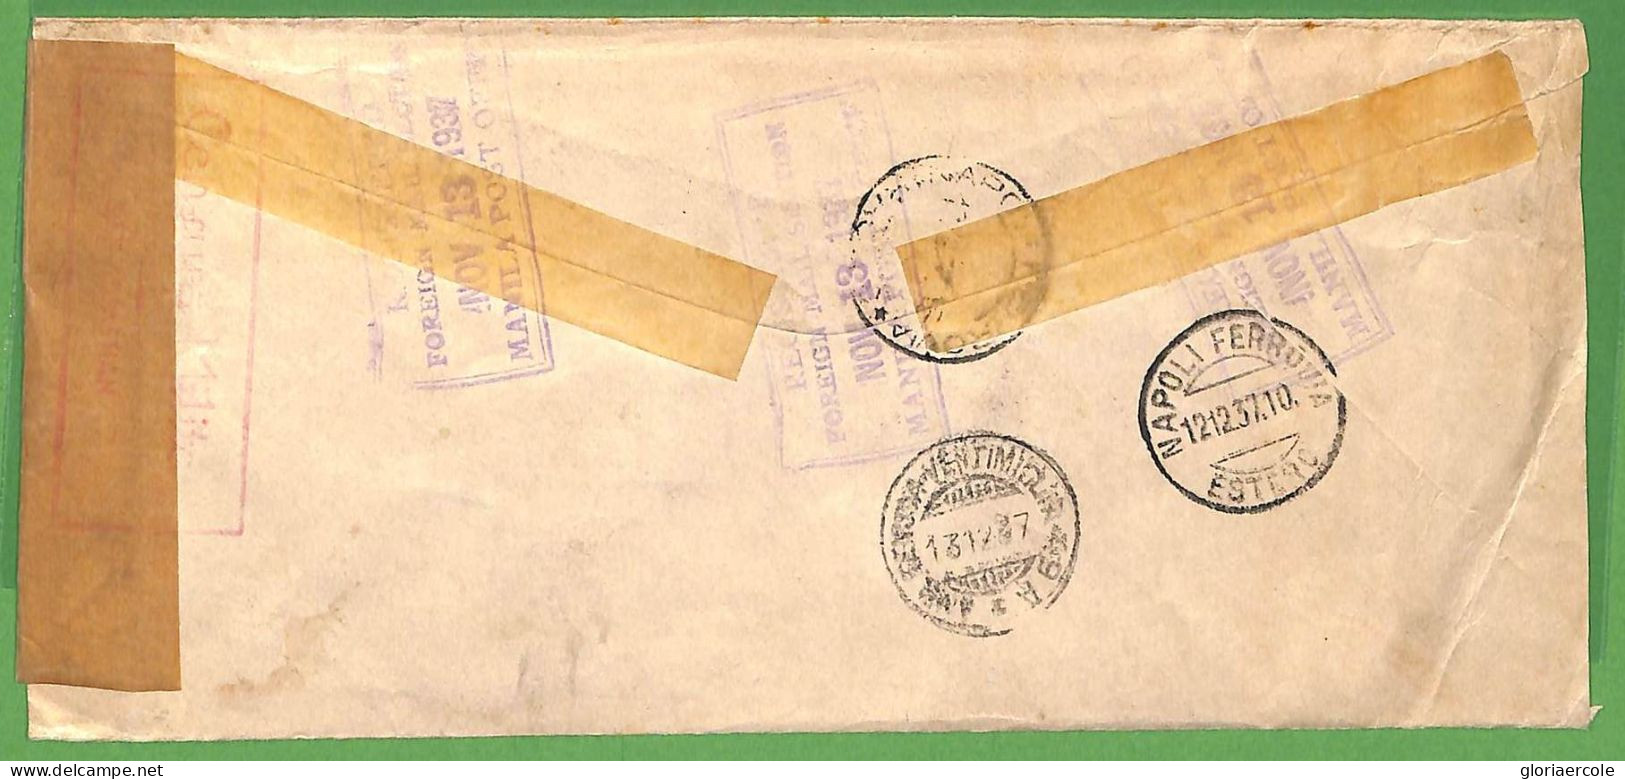 ZA1560 - USA Phillipines - POSTAL HISTORY - Cover To SPAIN - Spanish CENSOR 1937 - Marcophilie